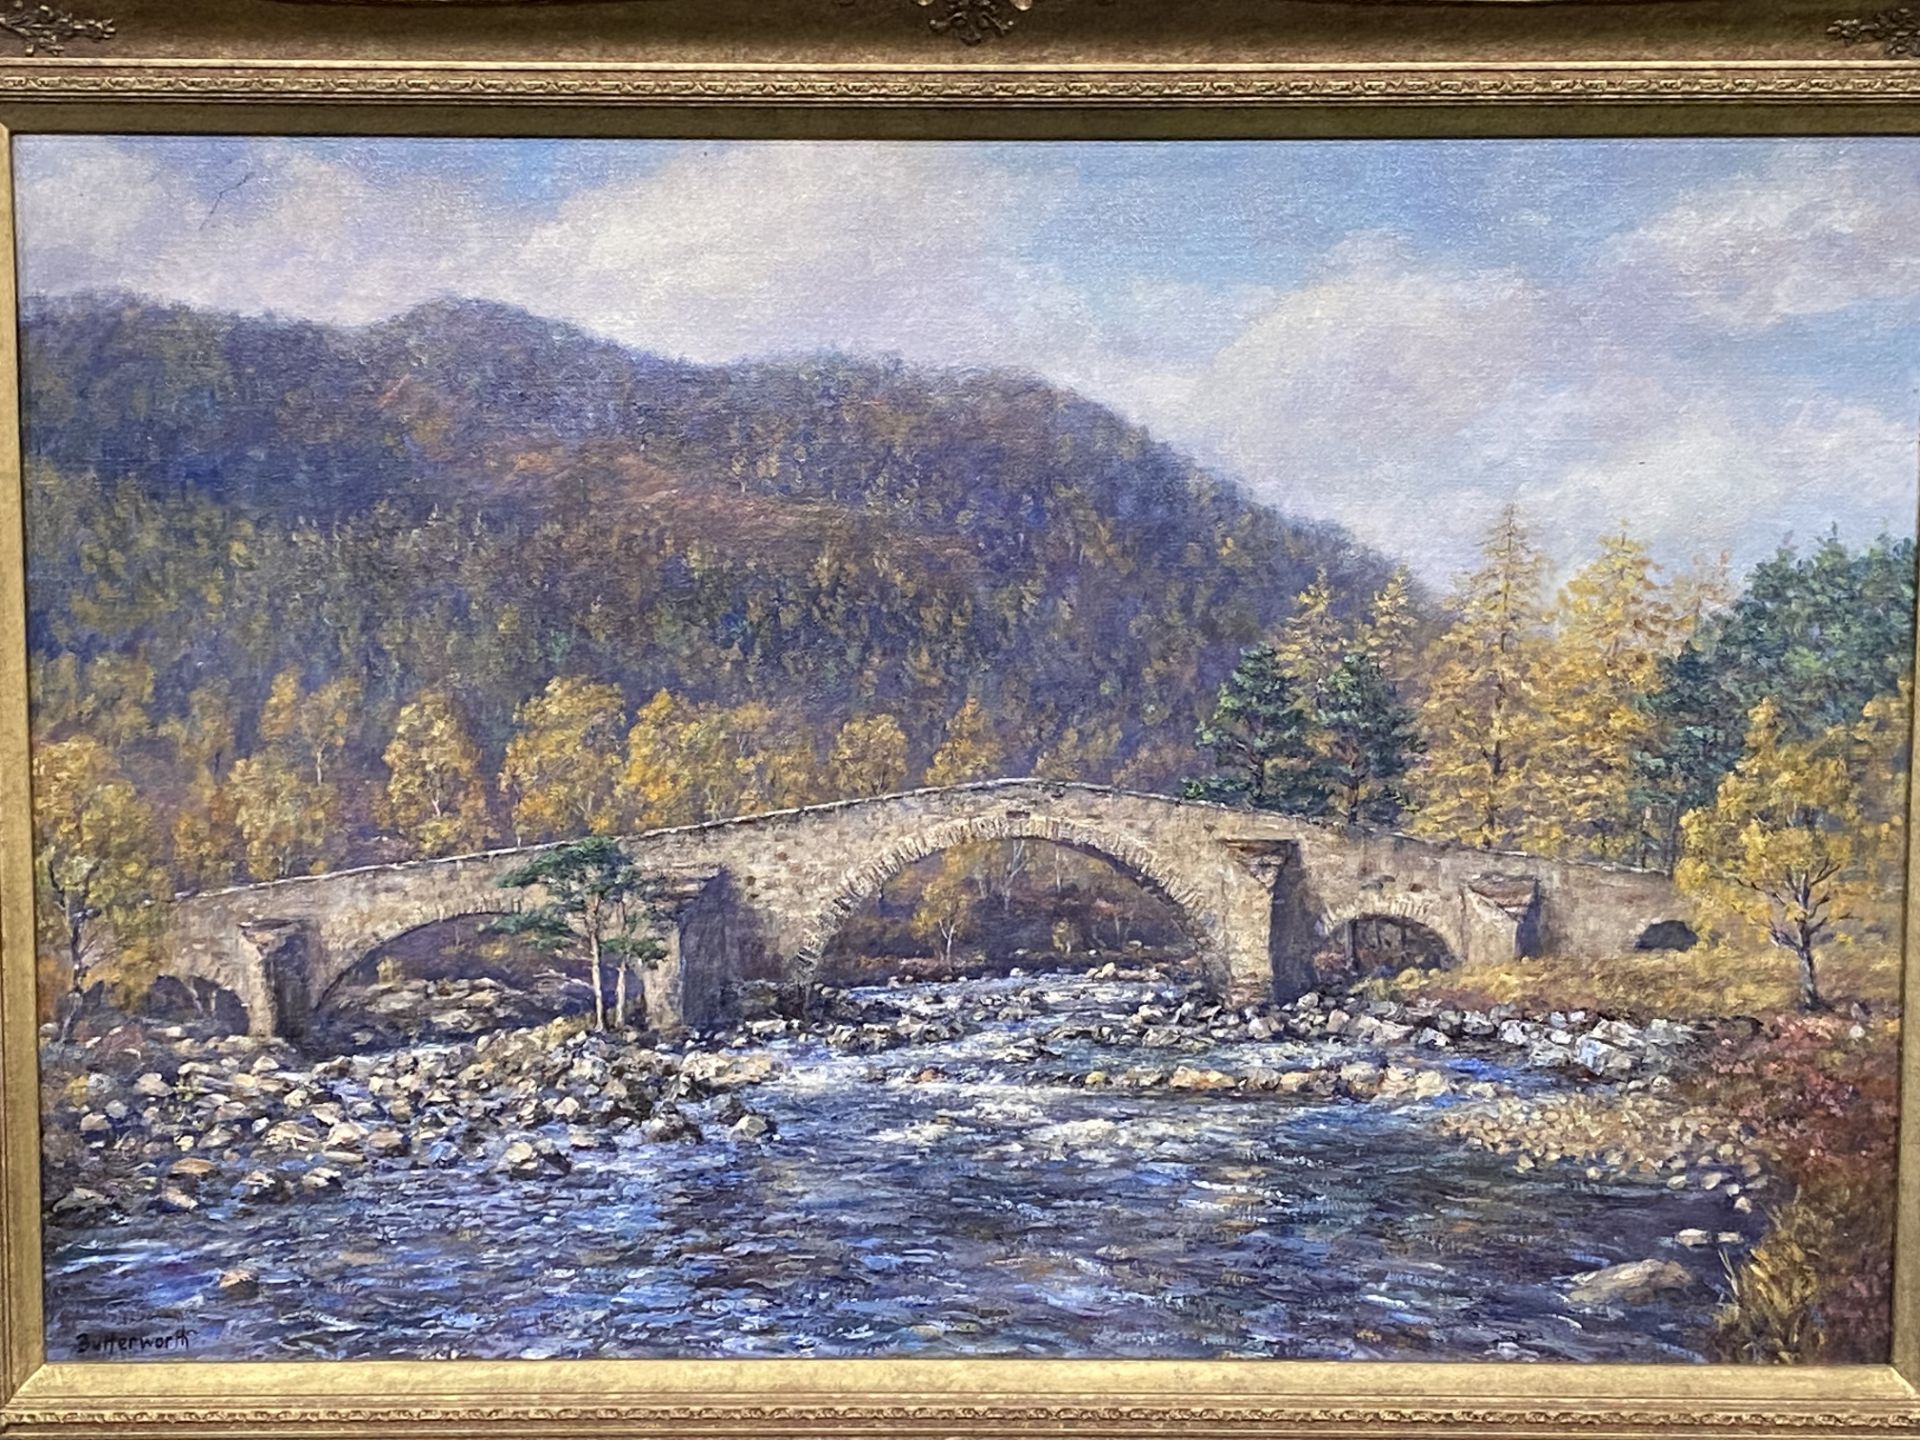 Framed oil on canvas of the Old Bridge at Invercauld - Image 2 of 4